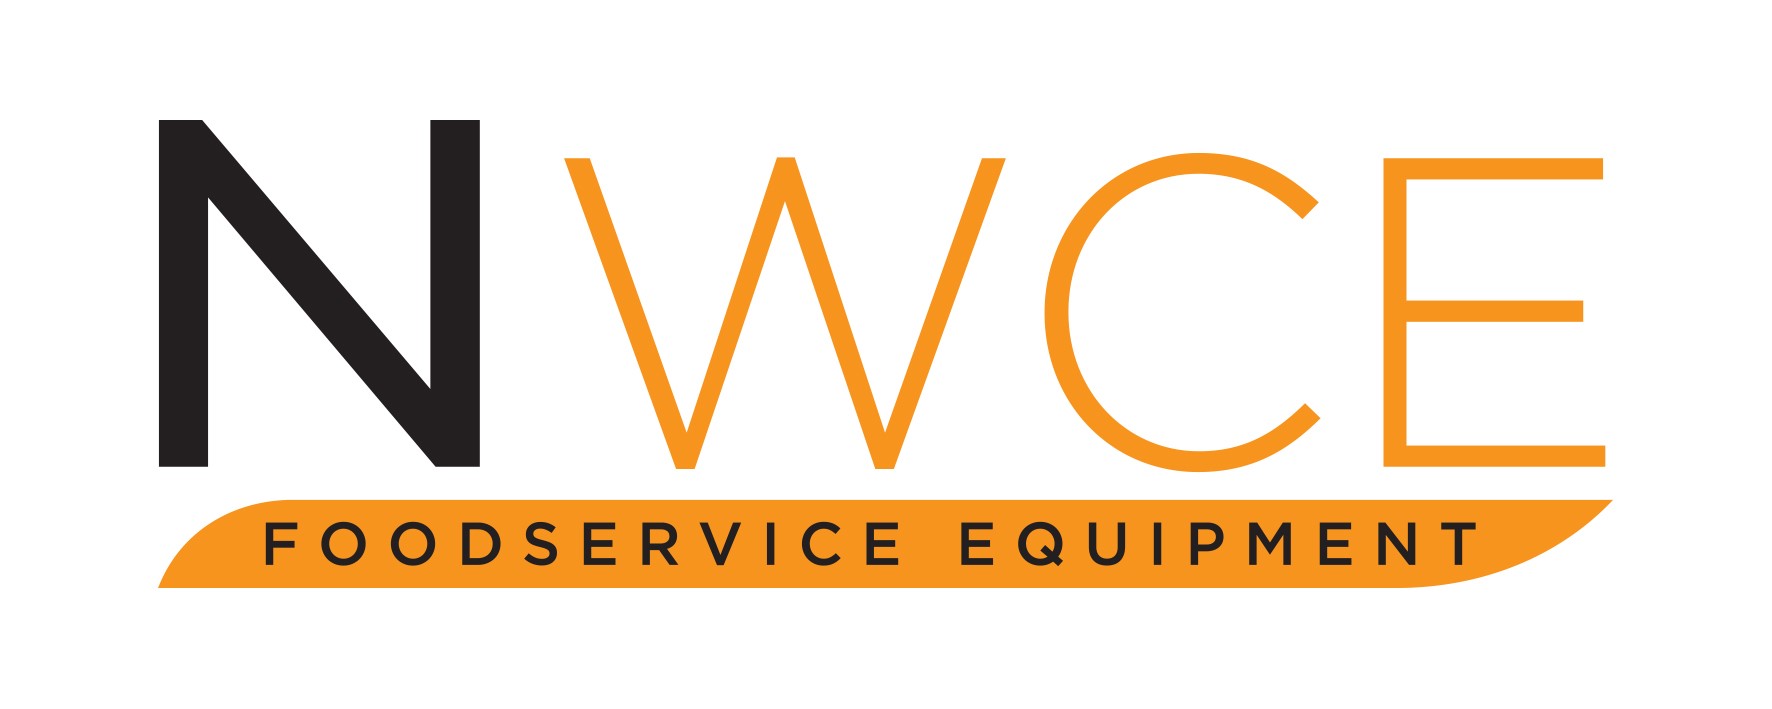 North West Catering Engineers t/a NWCE Foodservice Equipment Ltd (KEMS) image.